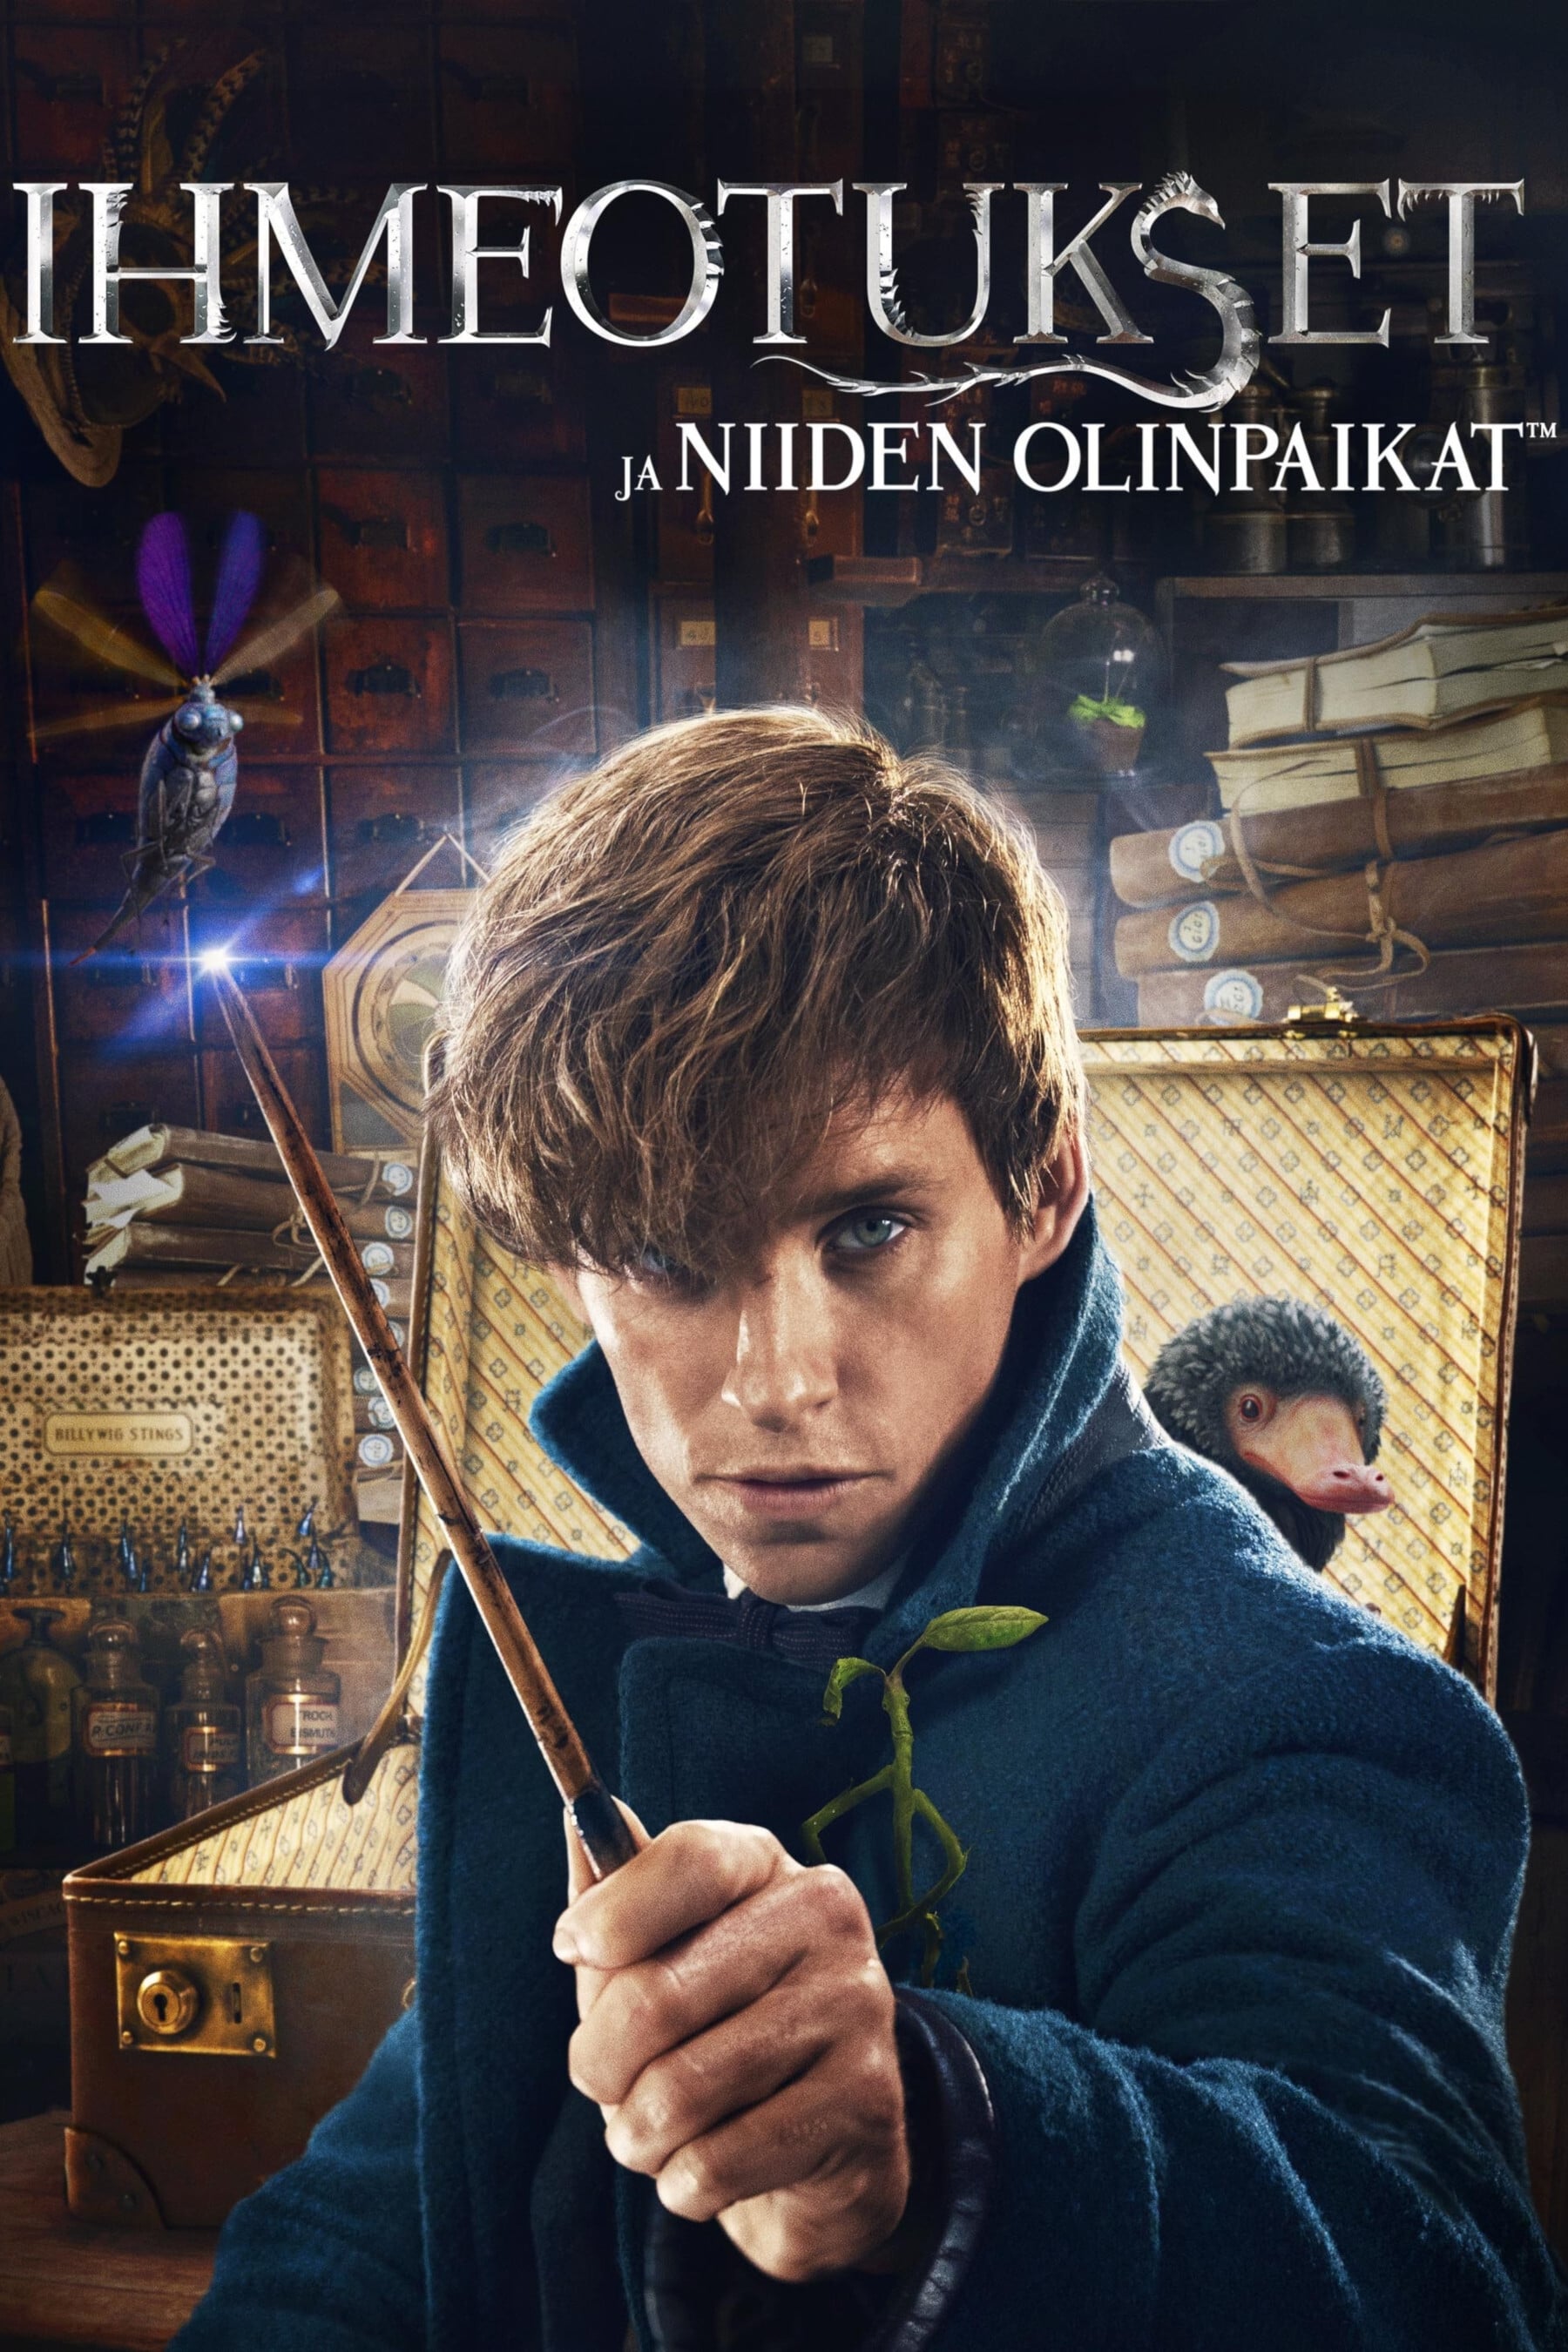 Fantastic Beasts and Where to Find Them